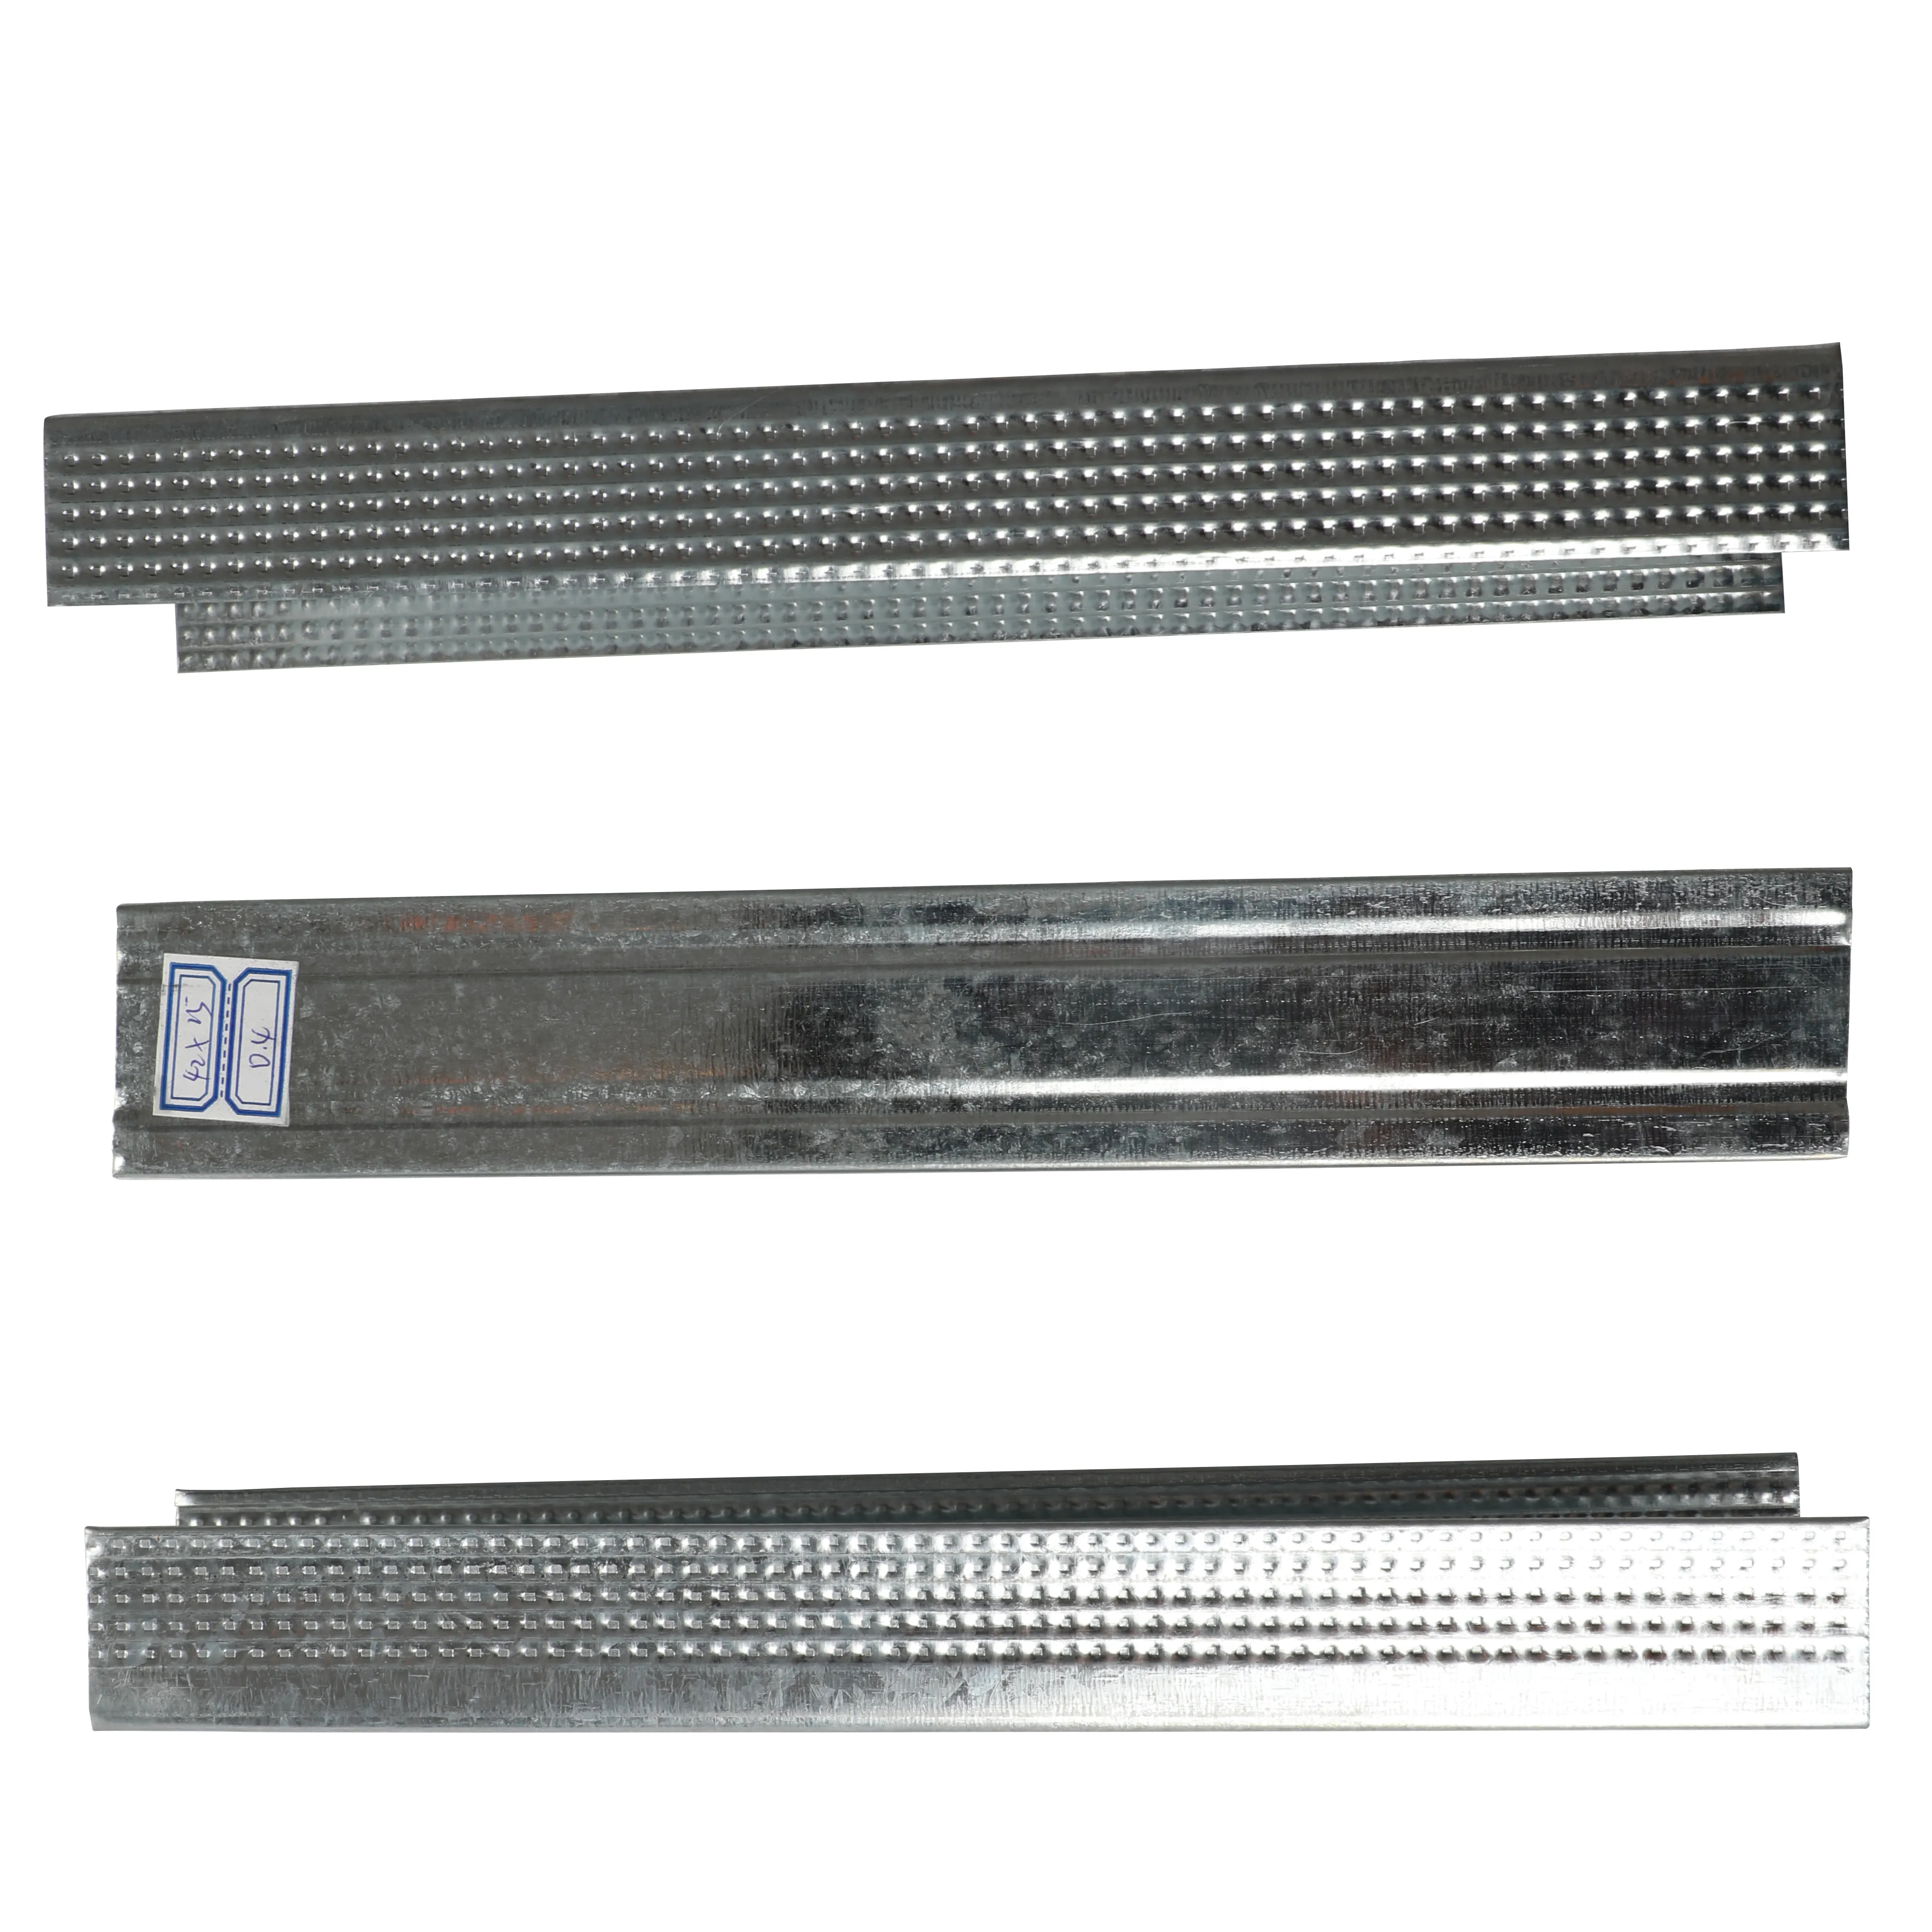 Stainless Steel Ceiling Grid Suspended Price Super T Bar Types False Aluminium Production Line Hanger Wire For